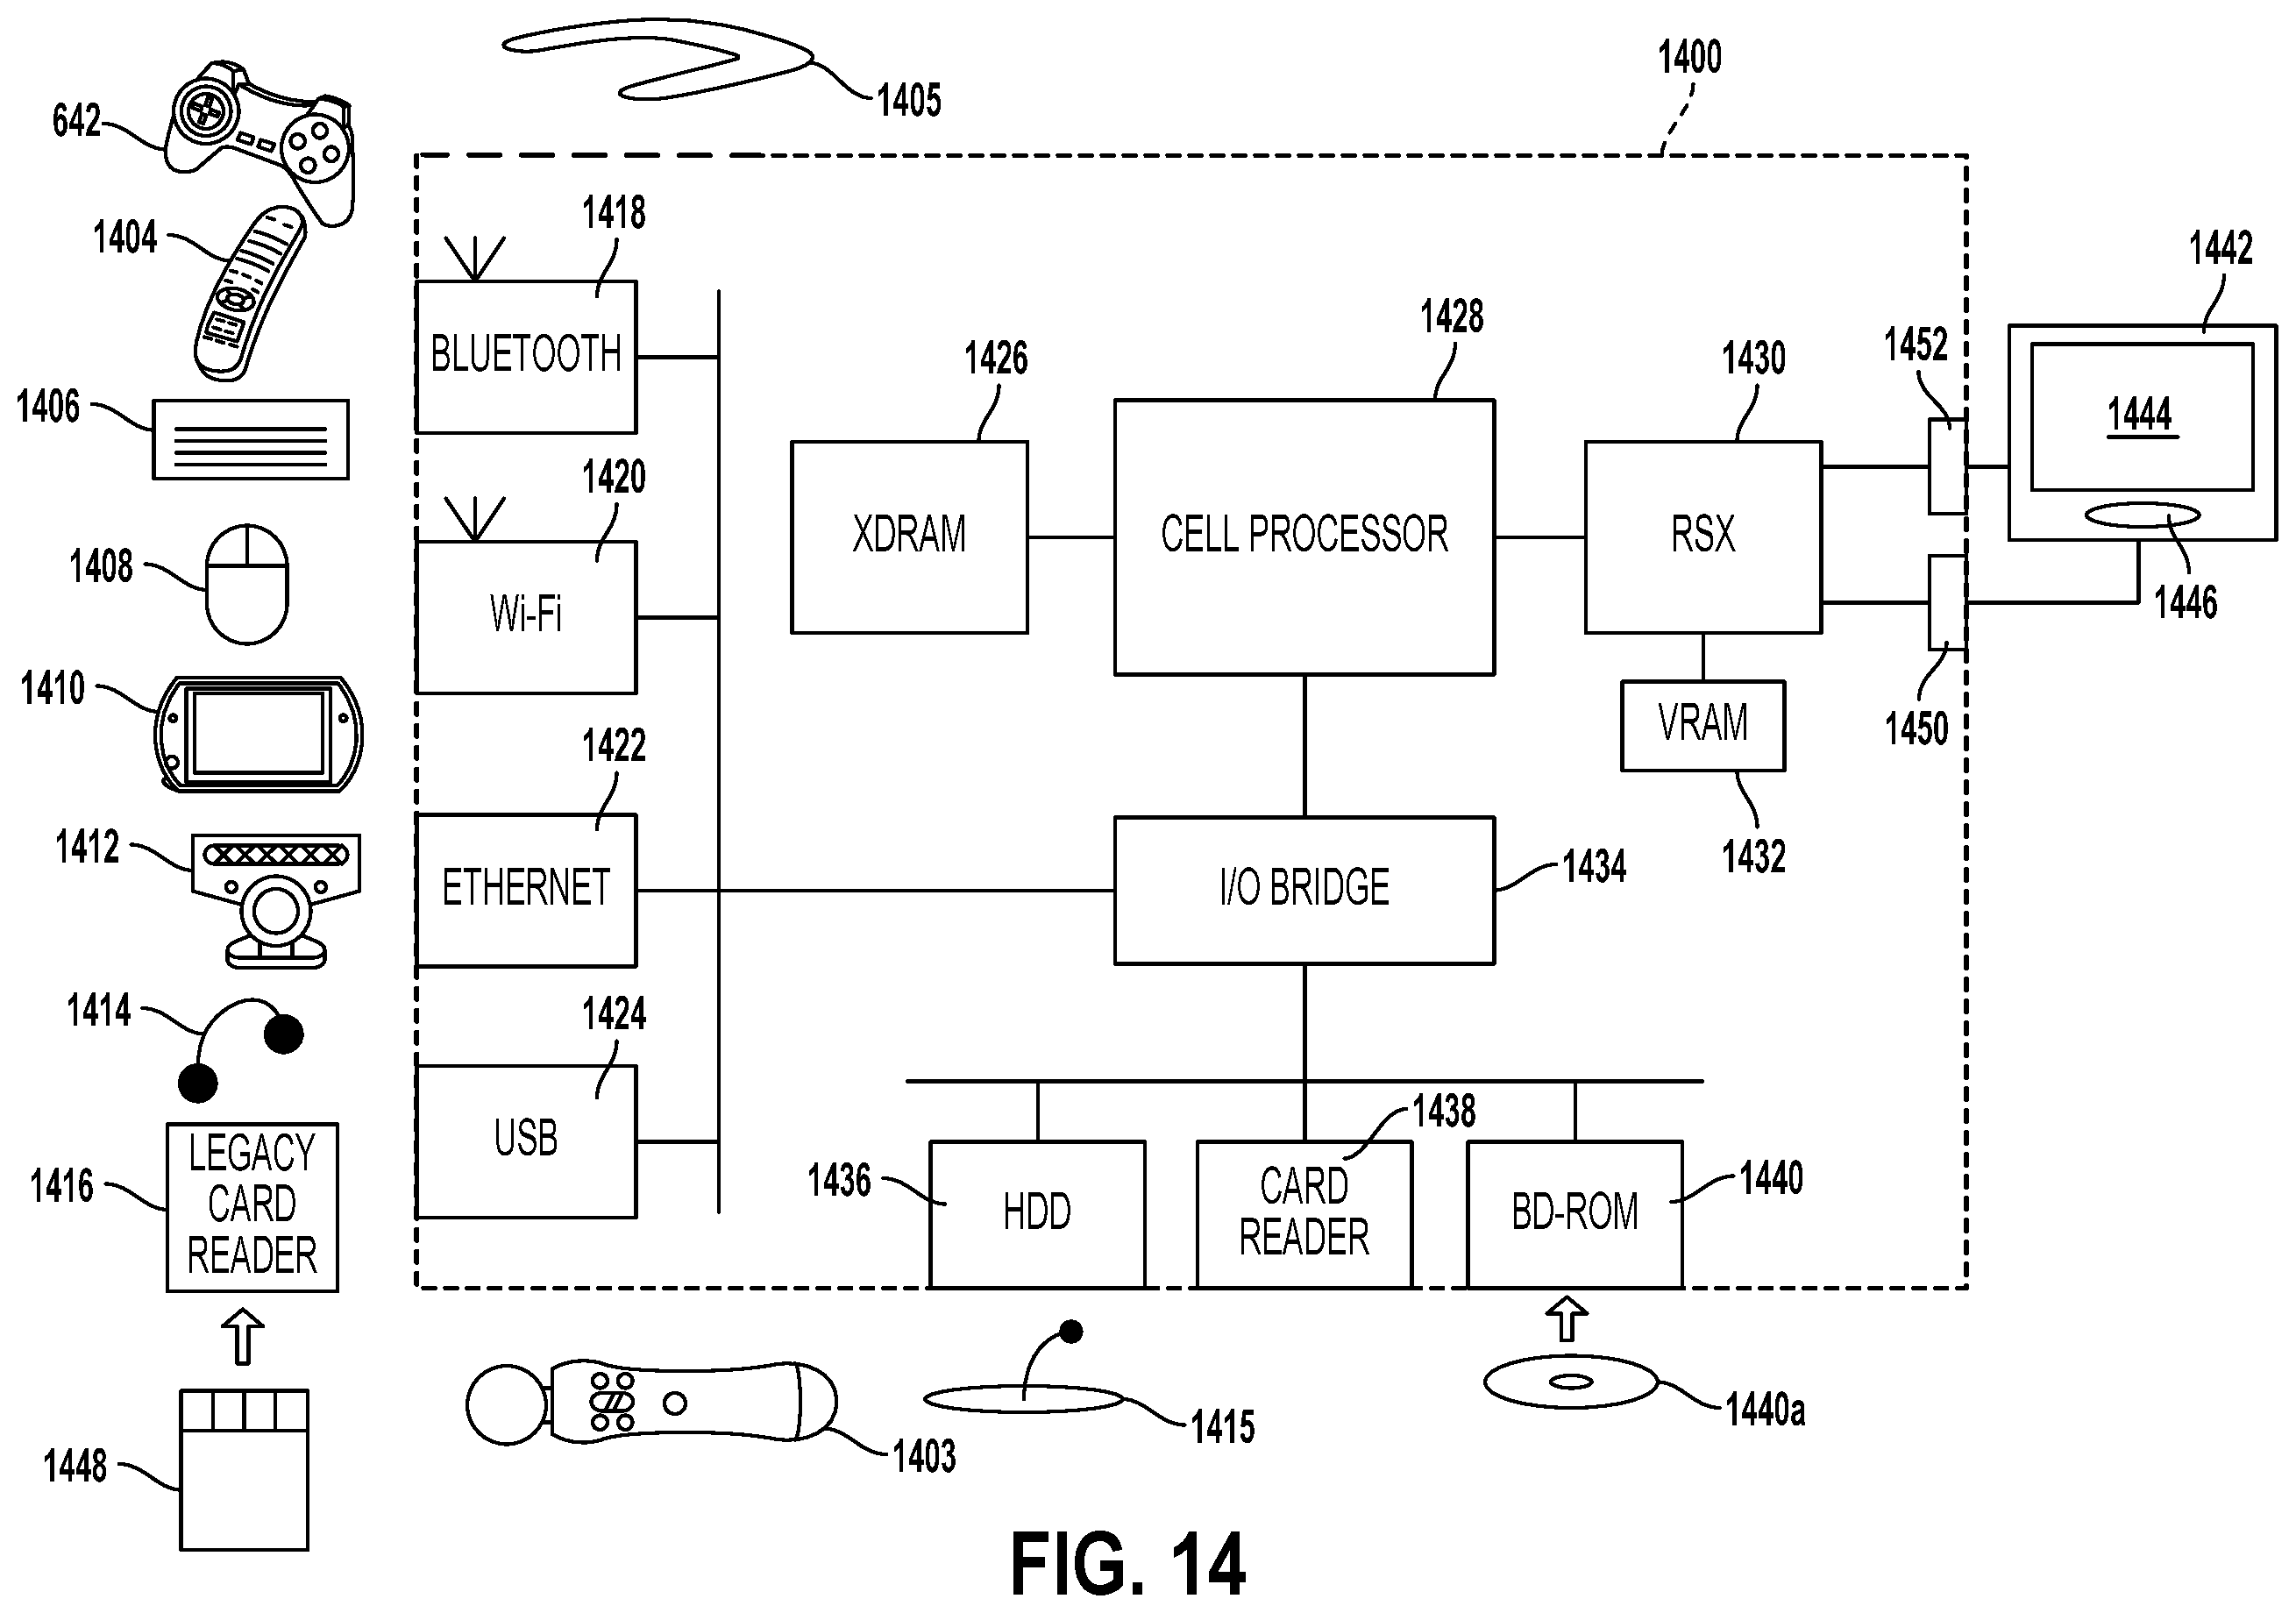 PS5 patent showing various PS3-era peripherals and controllers